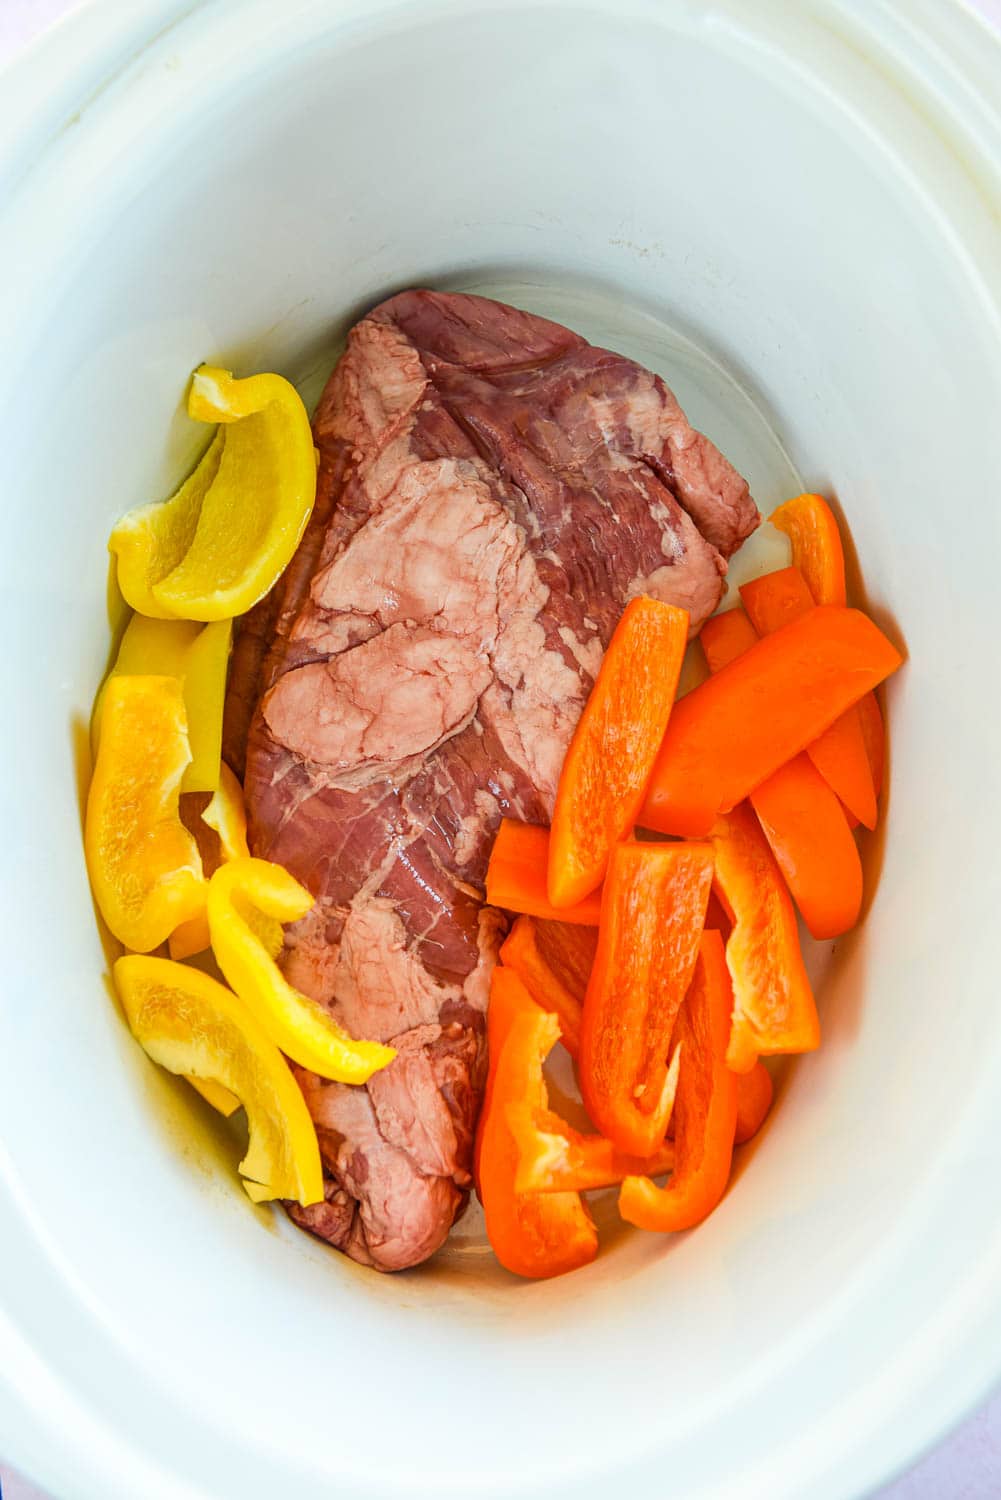 skirt steak and orange and yellow pepper slices in slow cooker